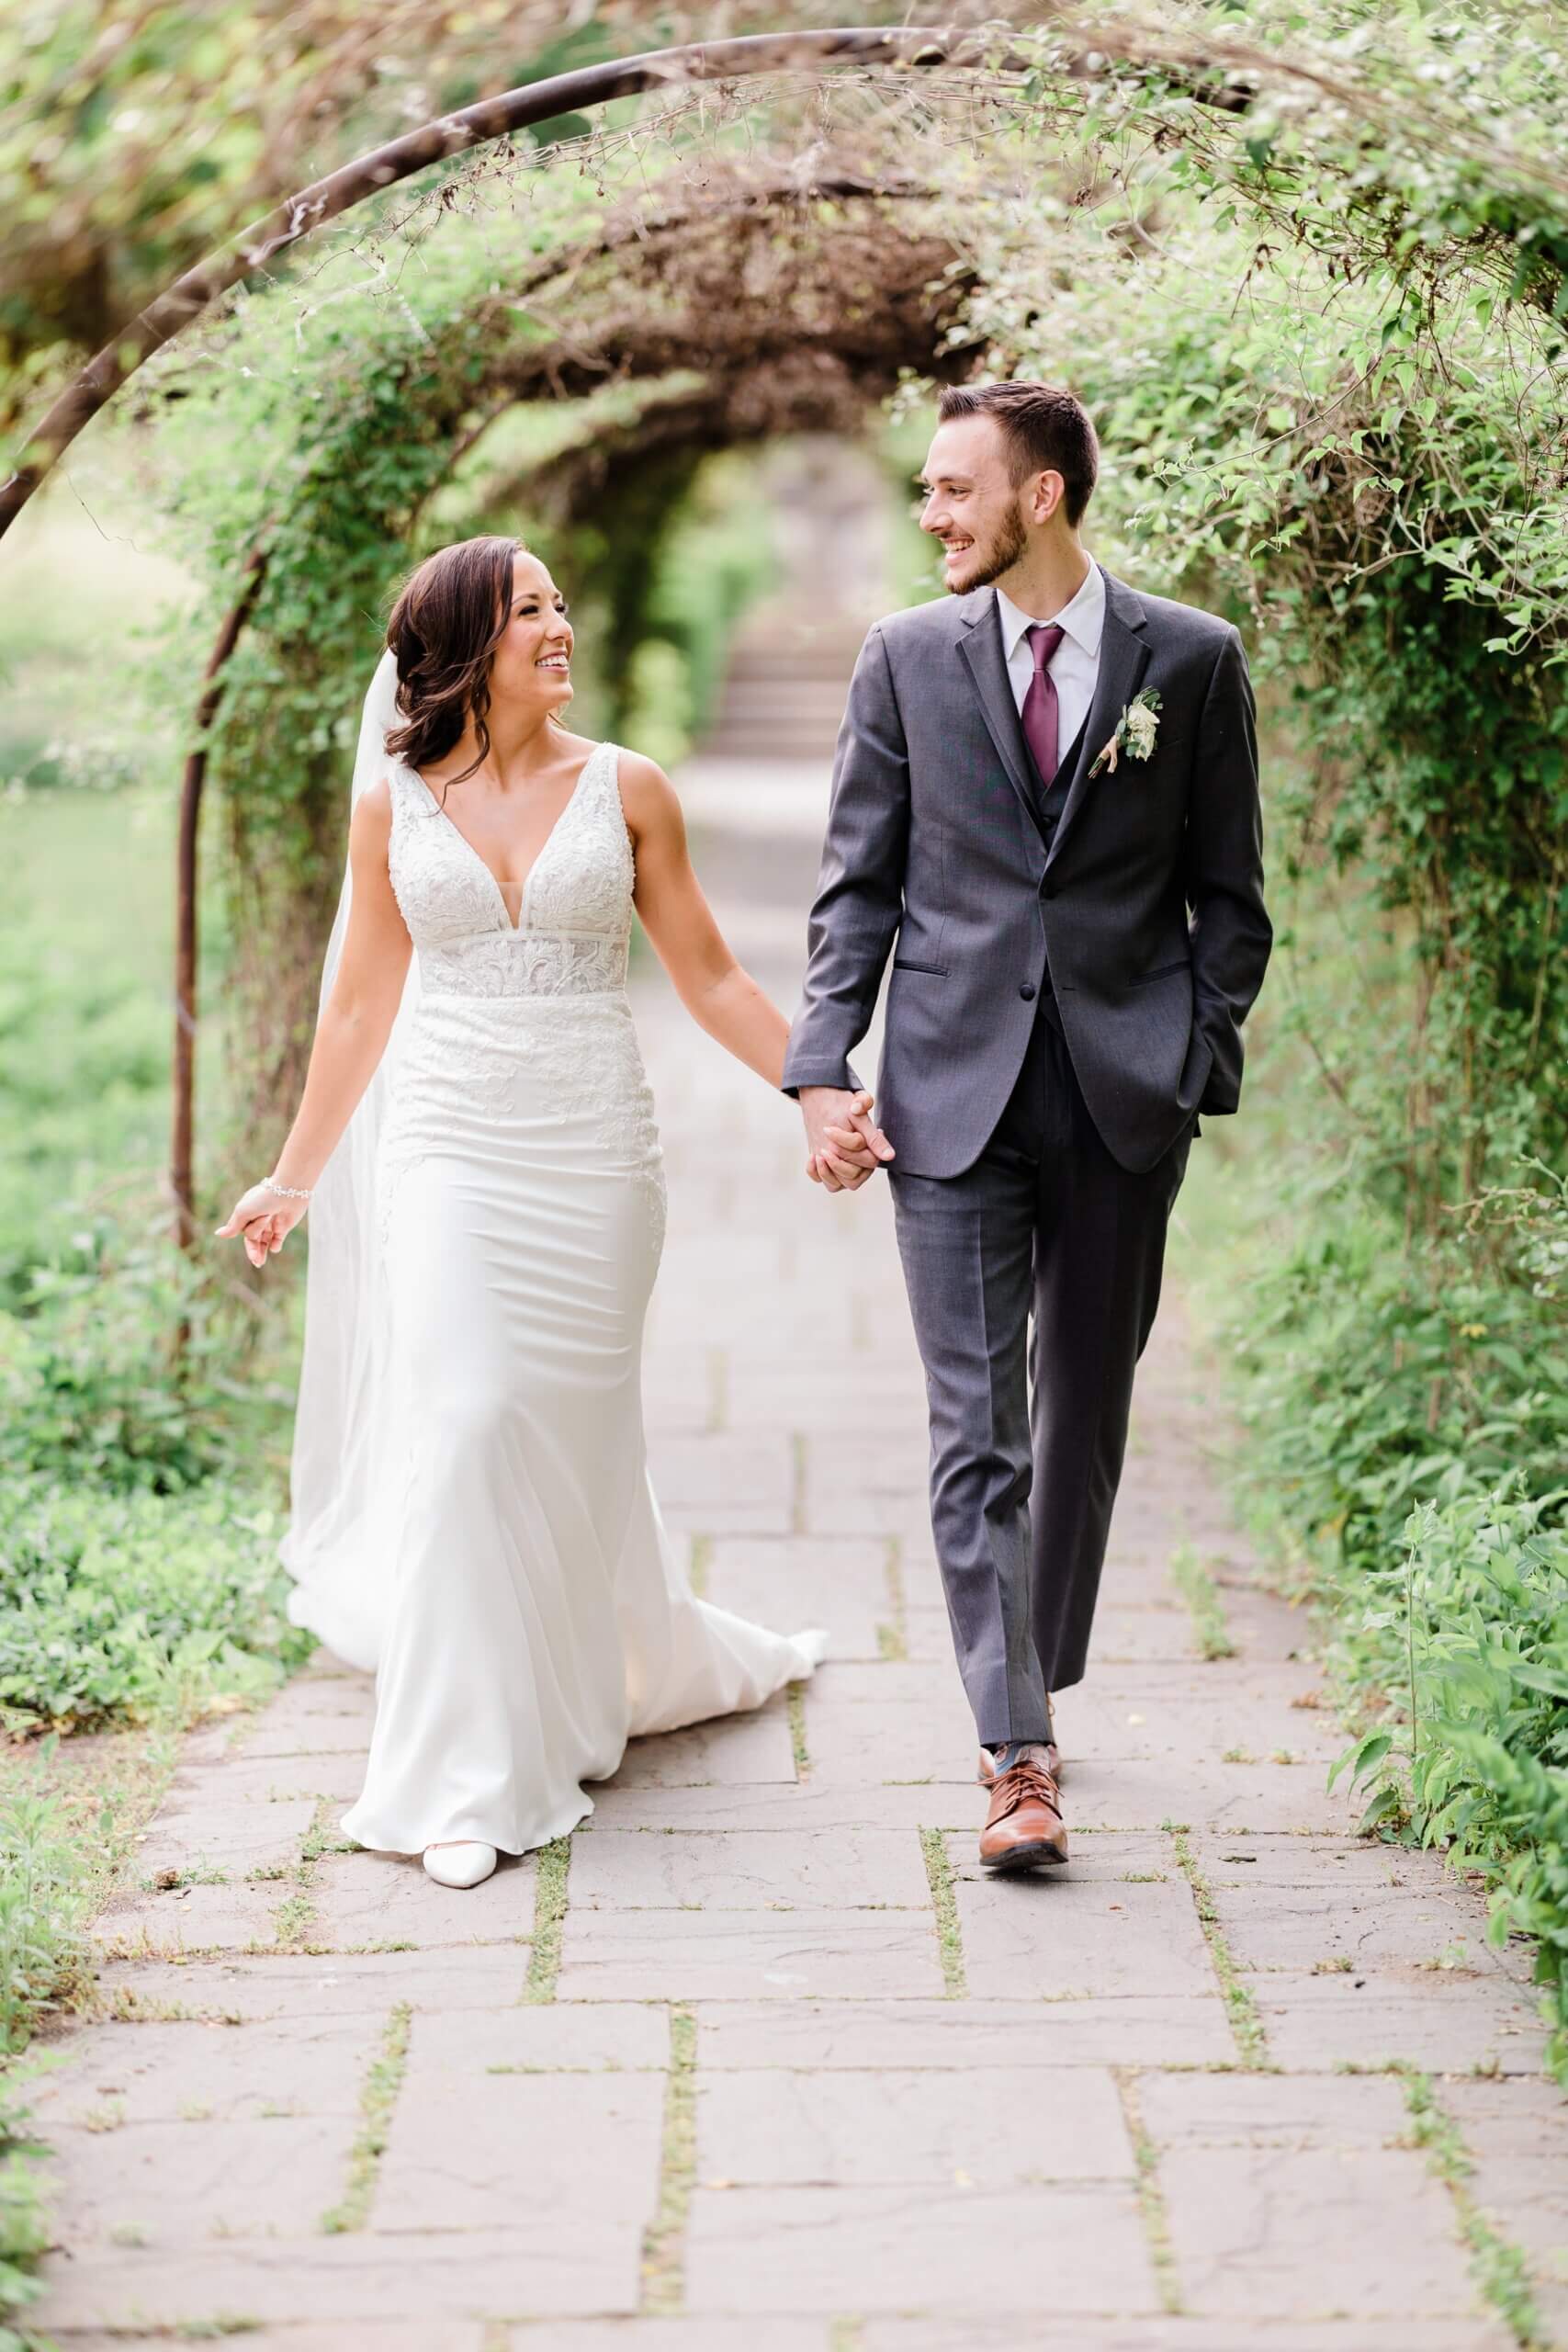 Bride and groom holding hands and walking under ivy covered arches